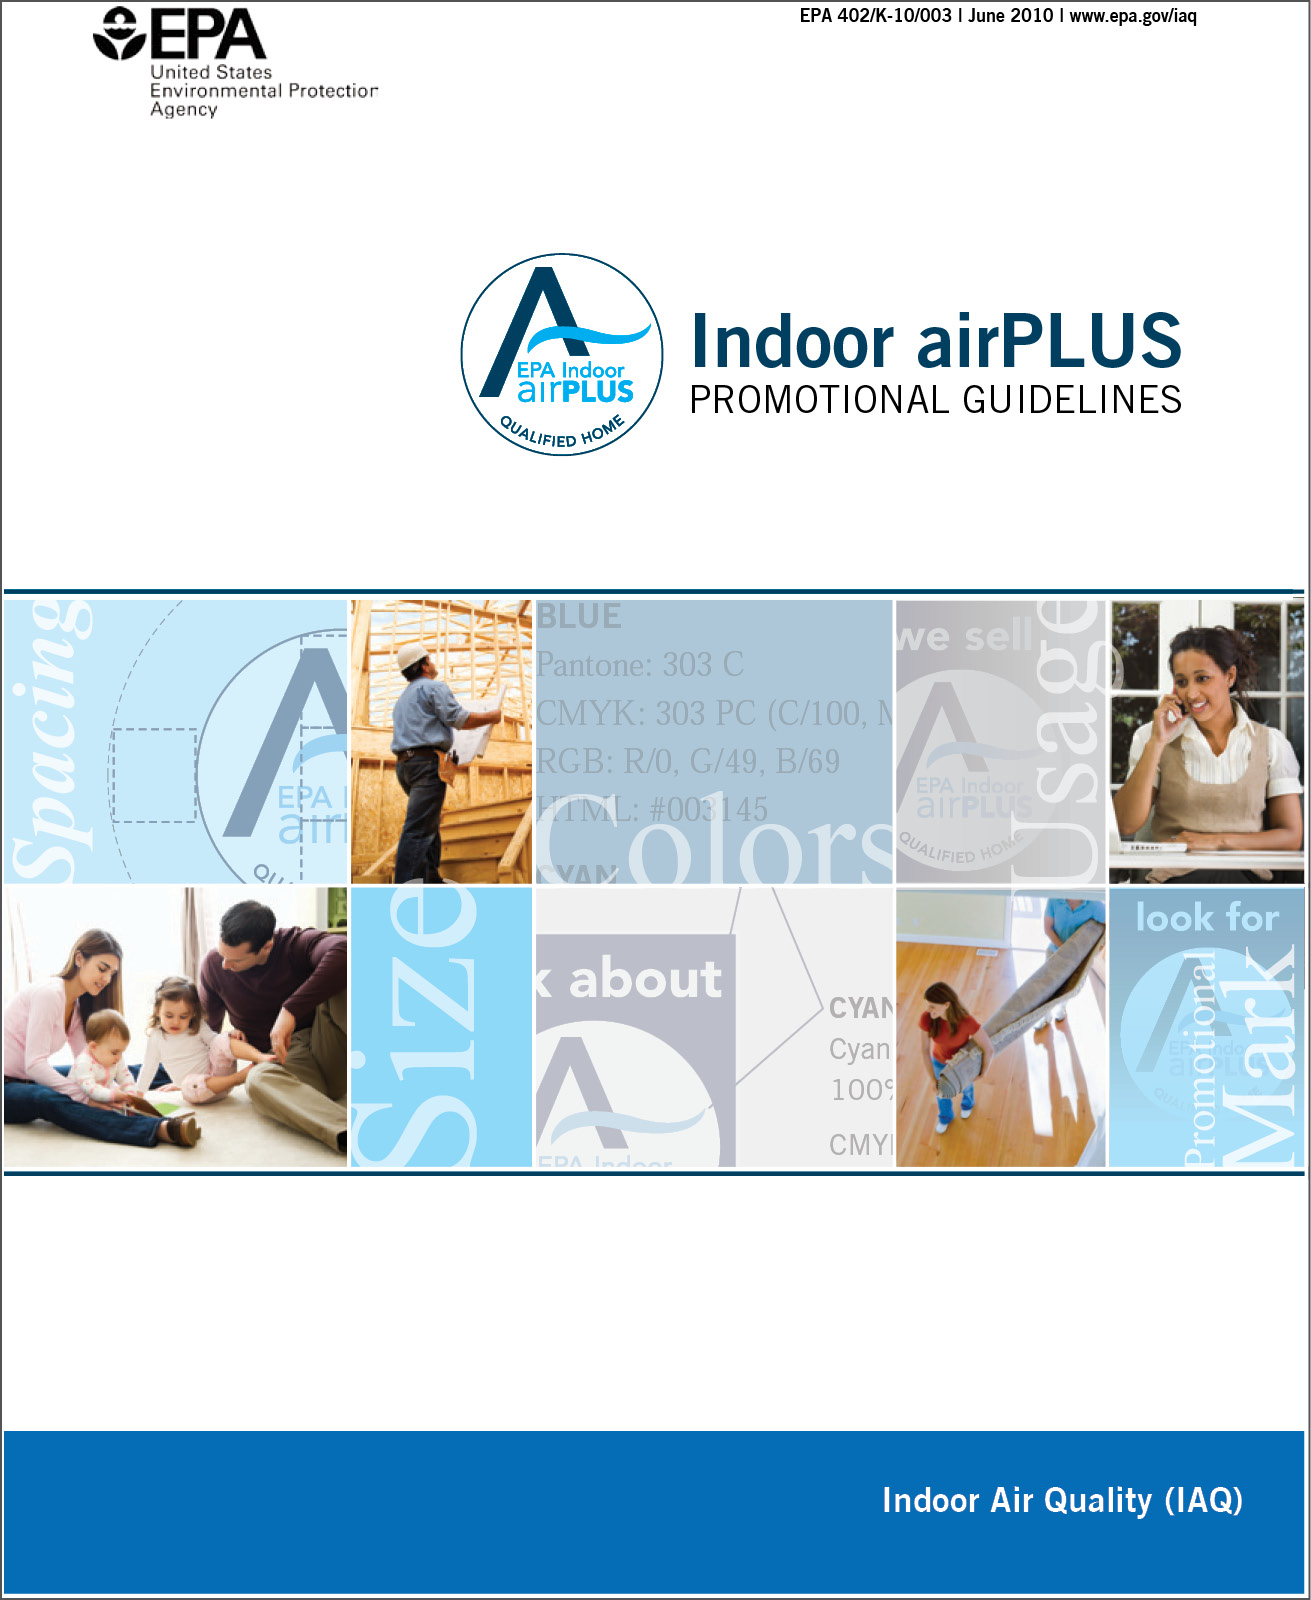 Indoor airPLUS Promotional Guidelines document cover